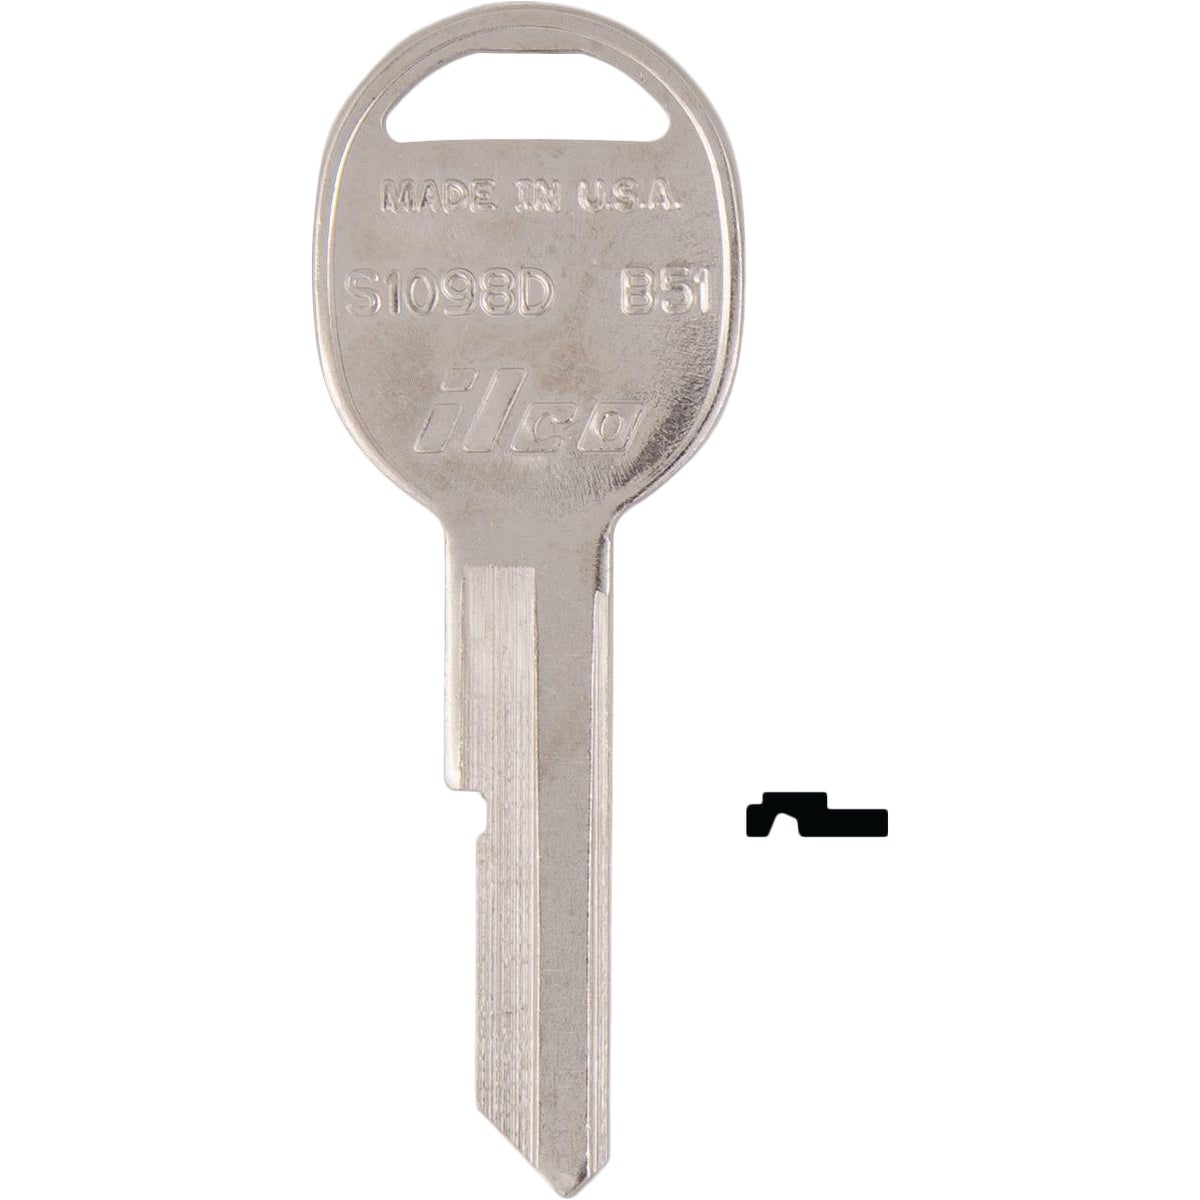 ILCO GM Nickel Plated Automotive Key, B51 / S1098D (10-Pack)